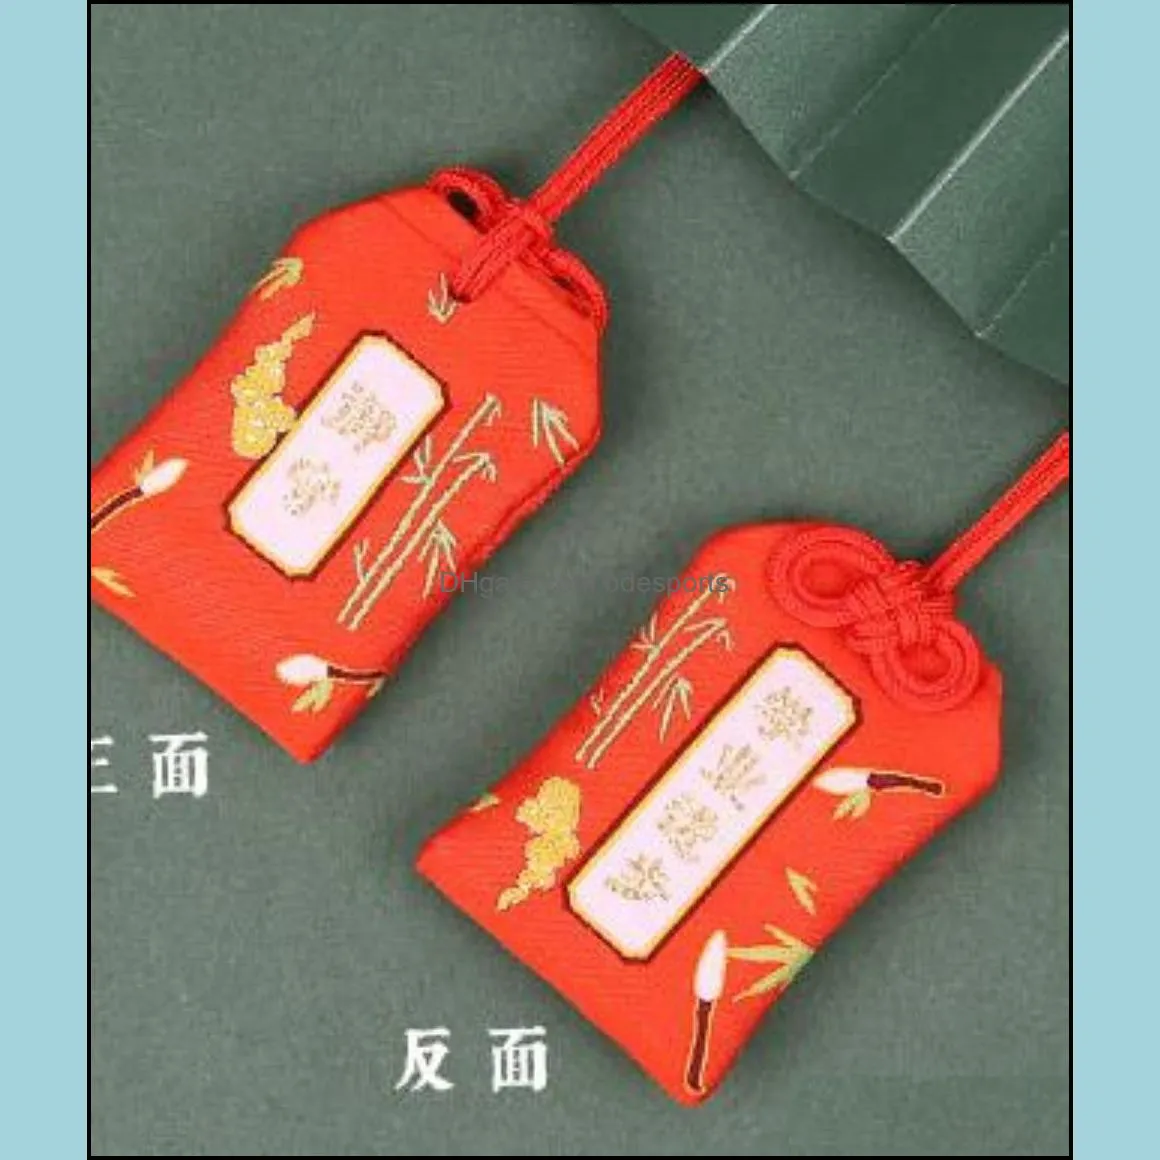 1Pcs Traditional Omamori Fortune Marriage Love Success In Wok Safety Healthy Good Luck Pendant Keyring Cute Gift Present Kasfu